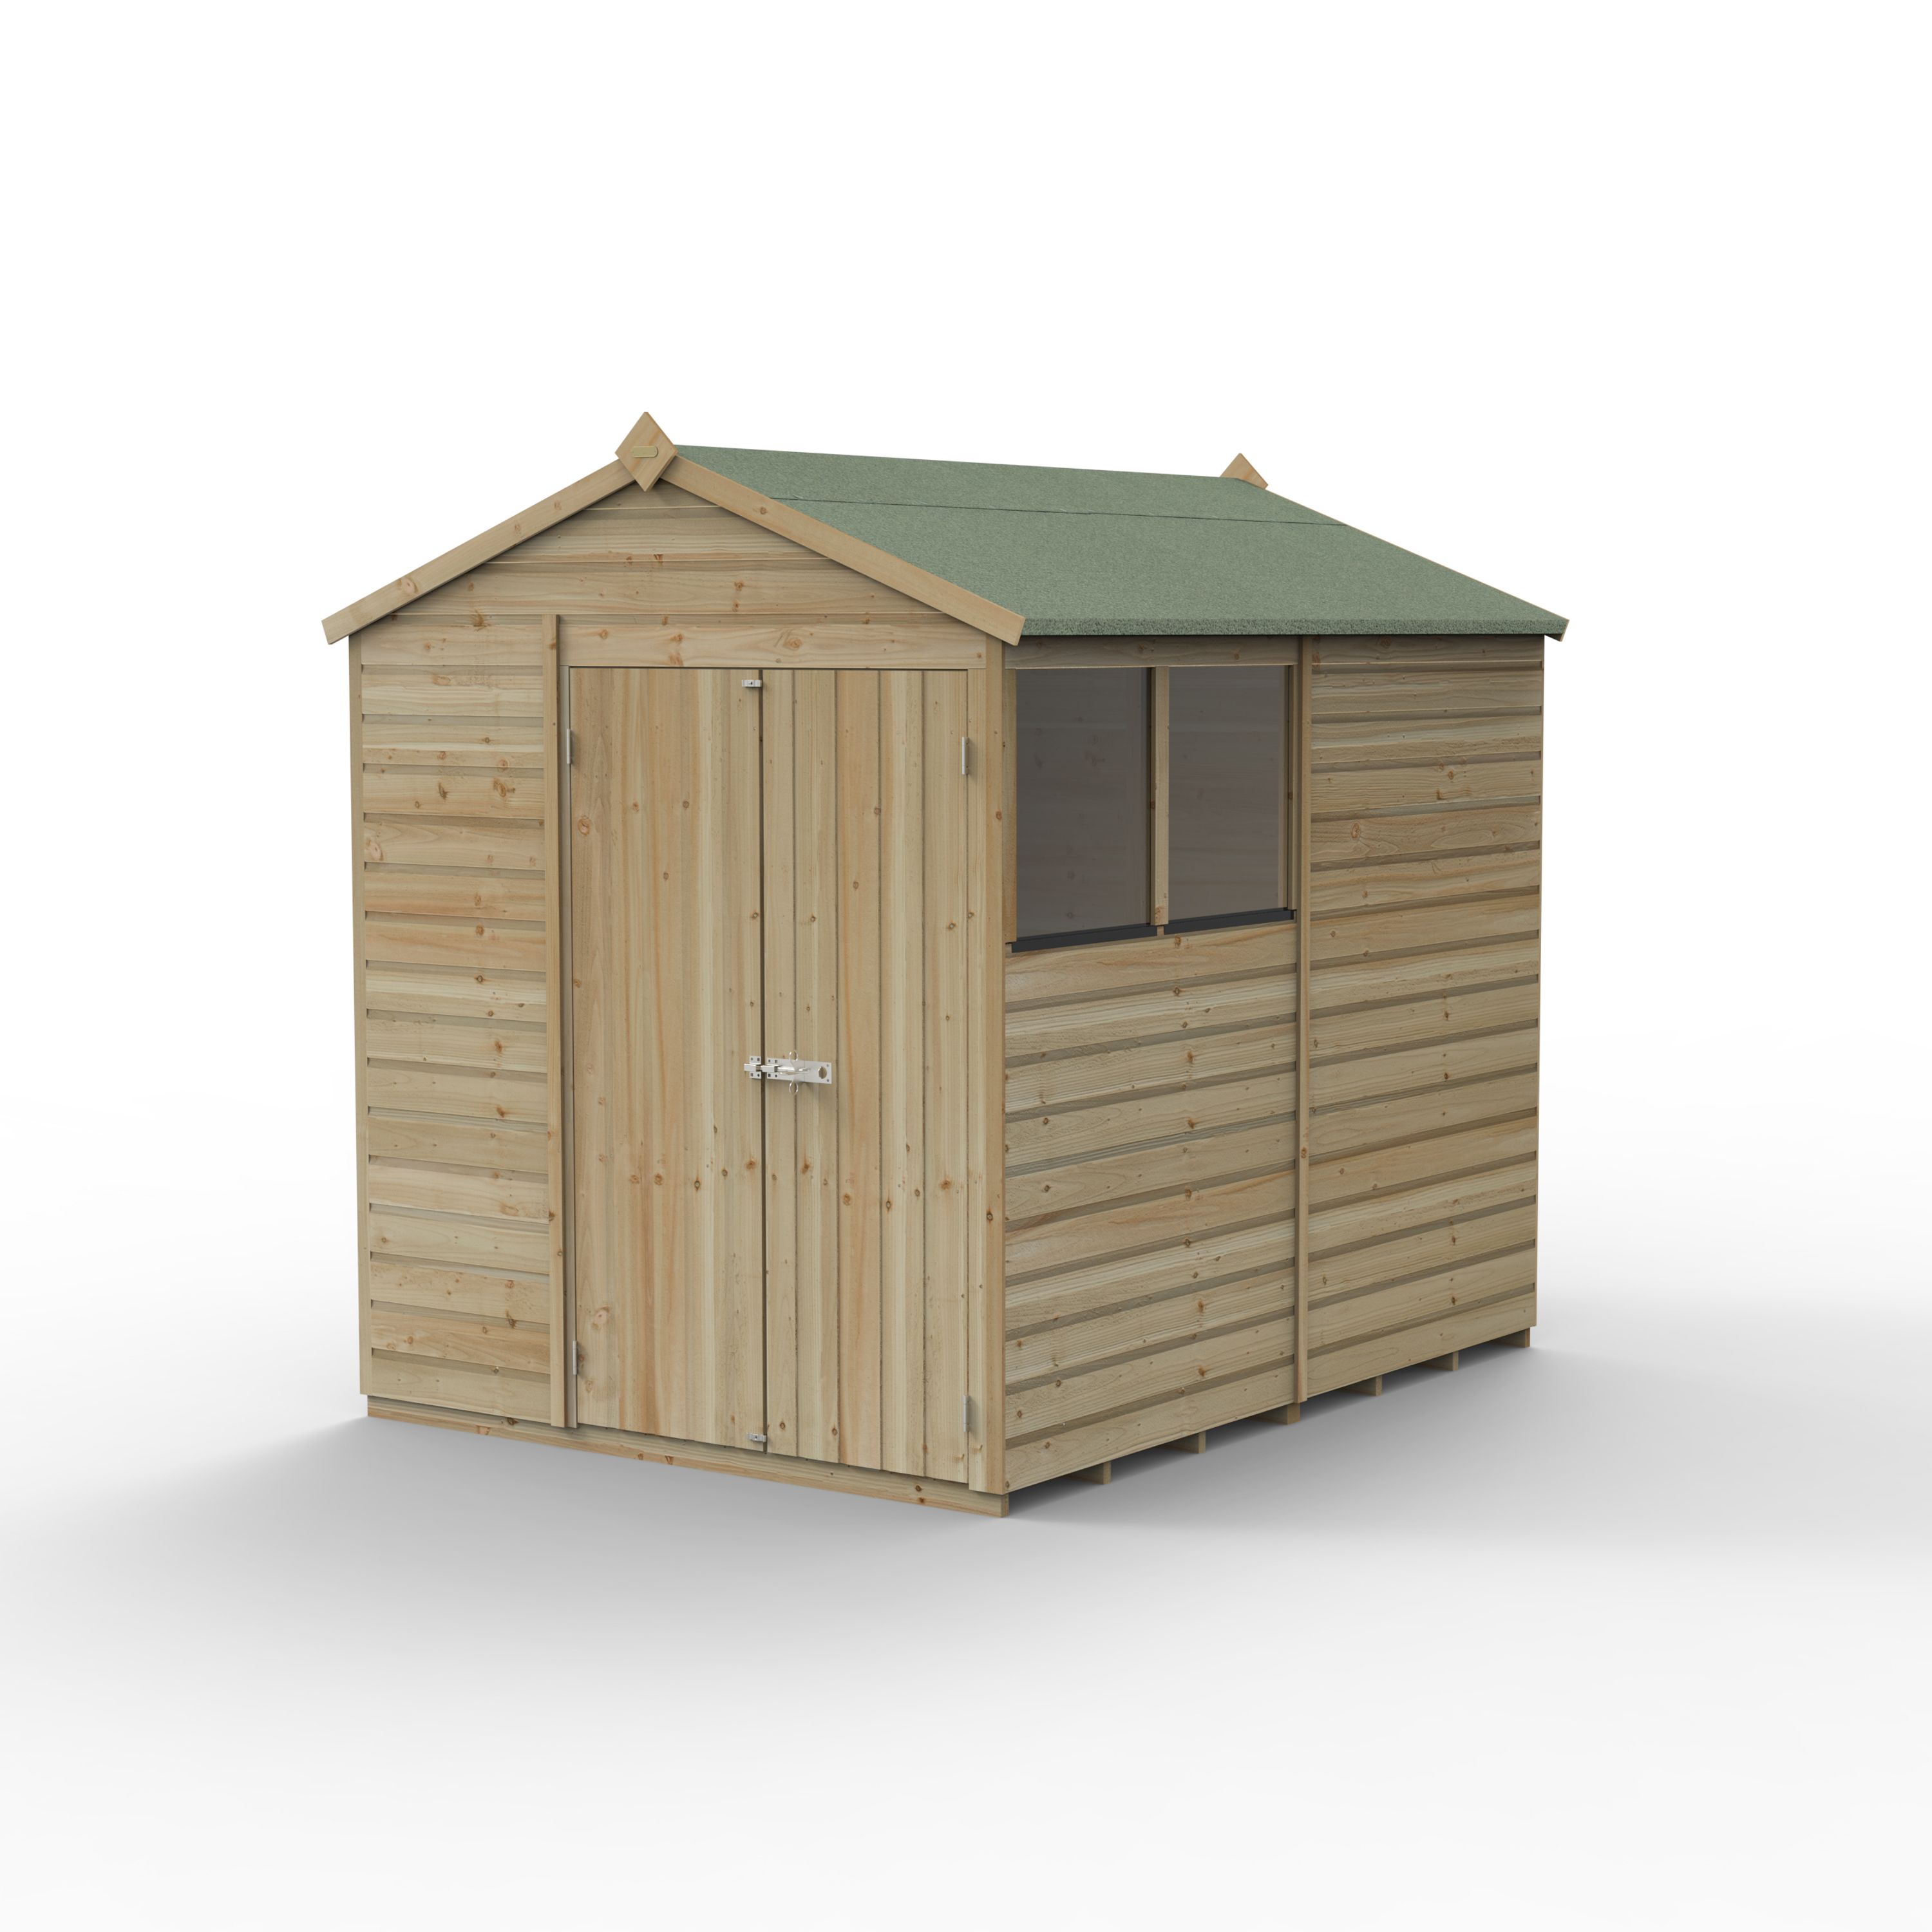 Forest Garden Beckwood 8x6 ft Apex Natural timber Wooden 2 door Shed with floor & 2 windows - Assembly not required